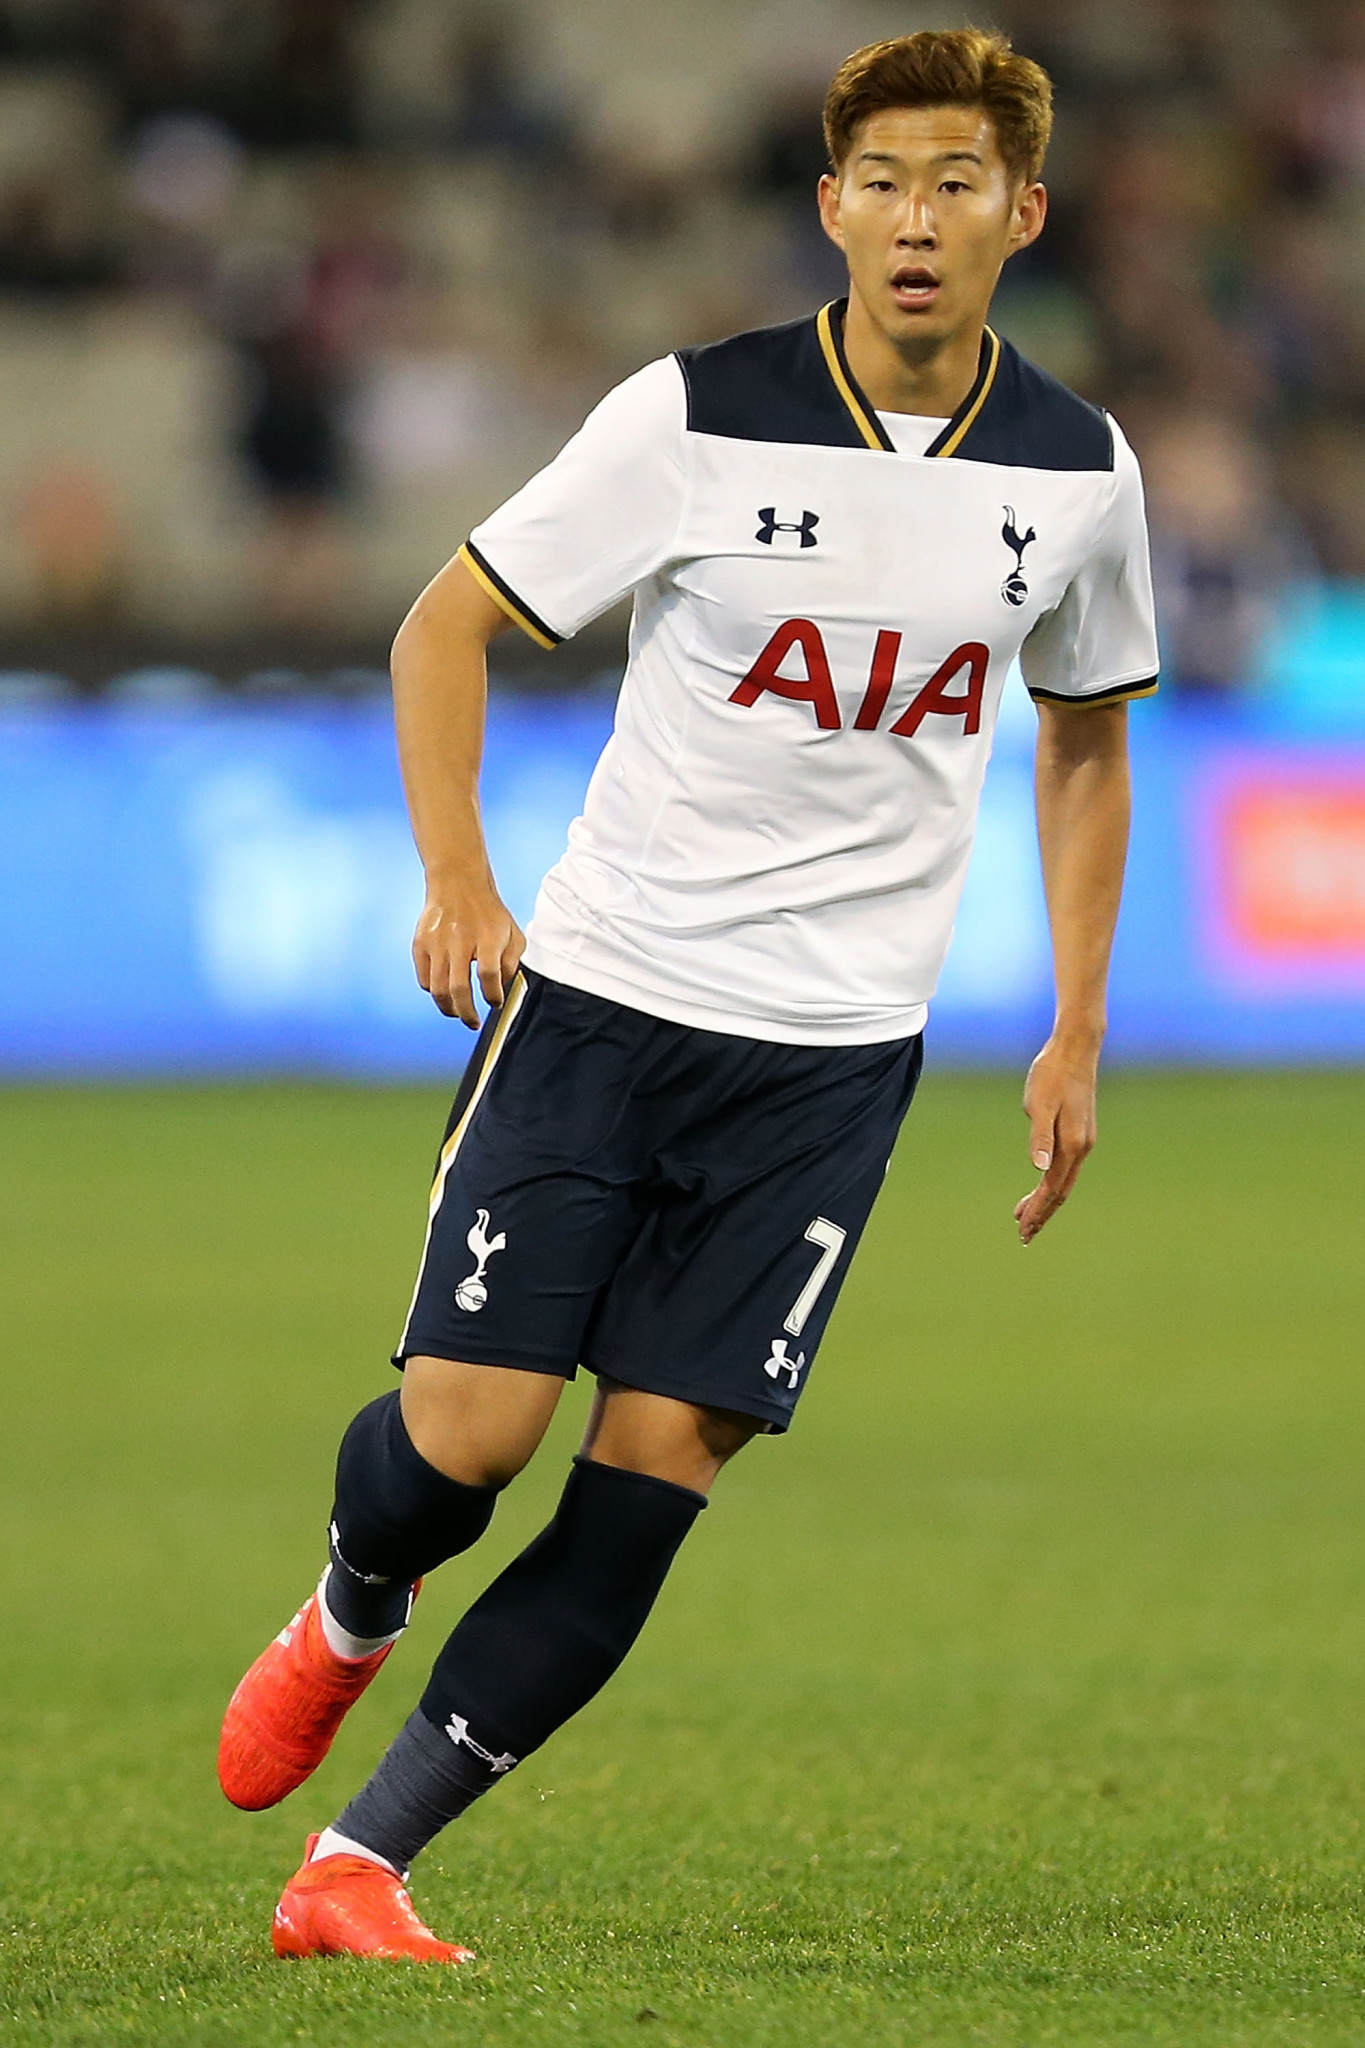 Son Hueng-min thanked his club, Tottenham Hotspur, for releasing him to play at the Asian Games ©Getty Images